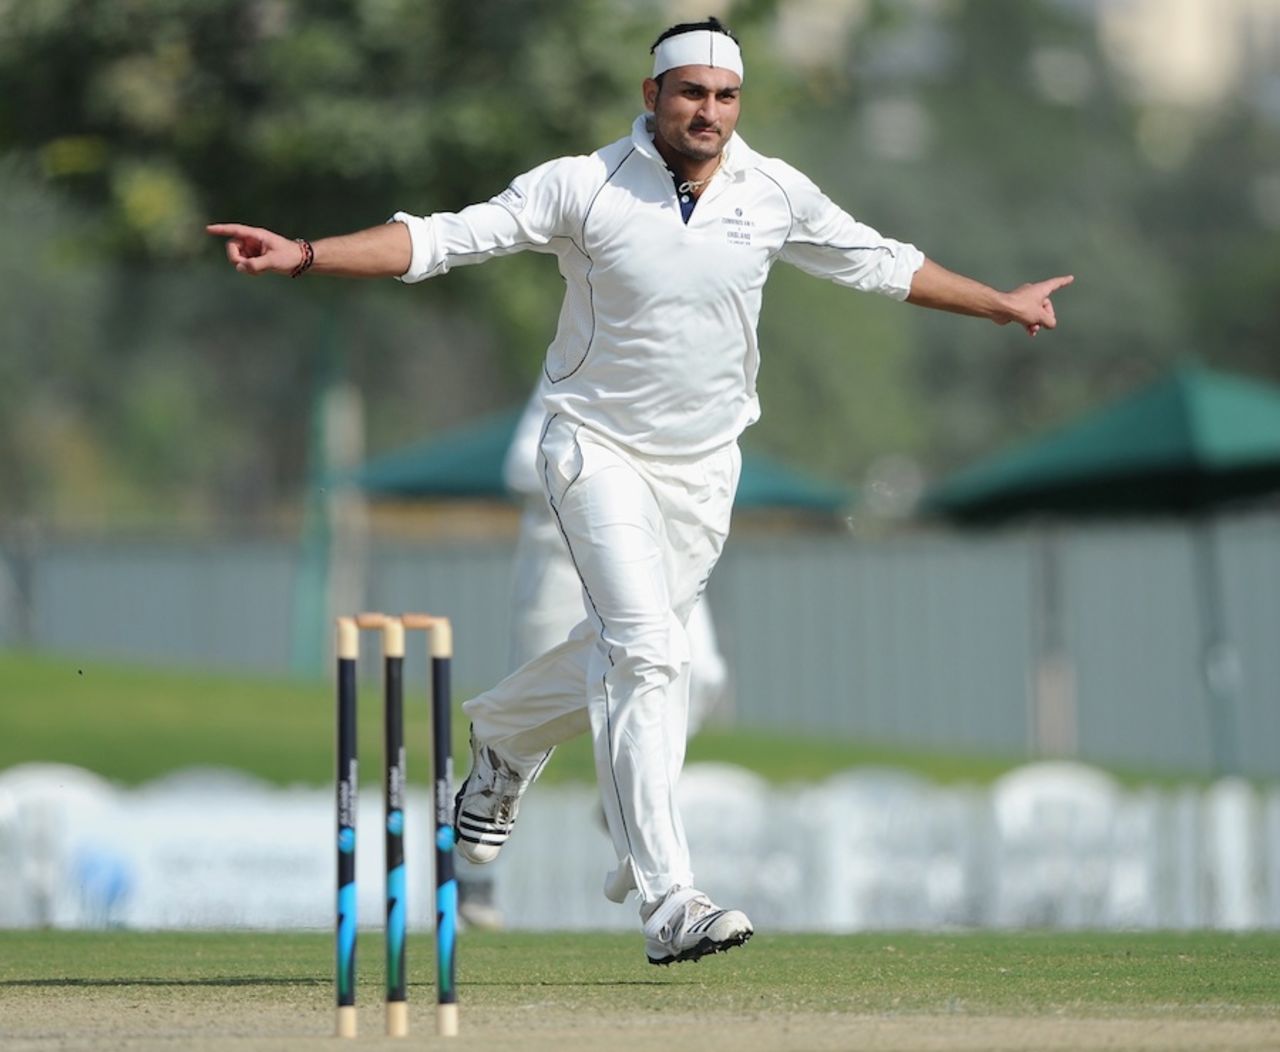 Hamid Hassan celebrates the dismissal of Andrew Strauss, ICC Combined XI v England XI, Dubai, 2nd day, January 8, 2012